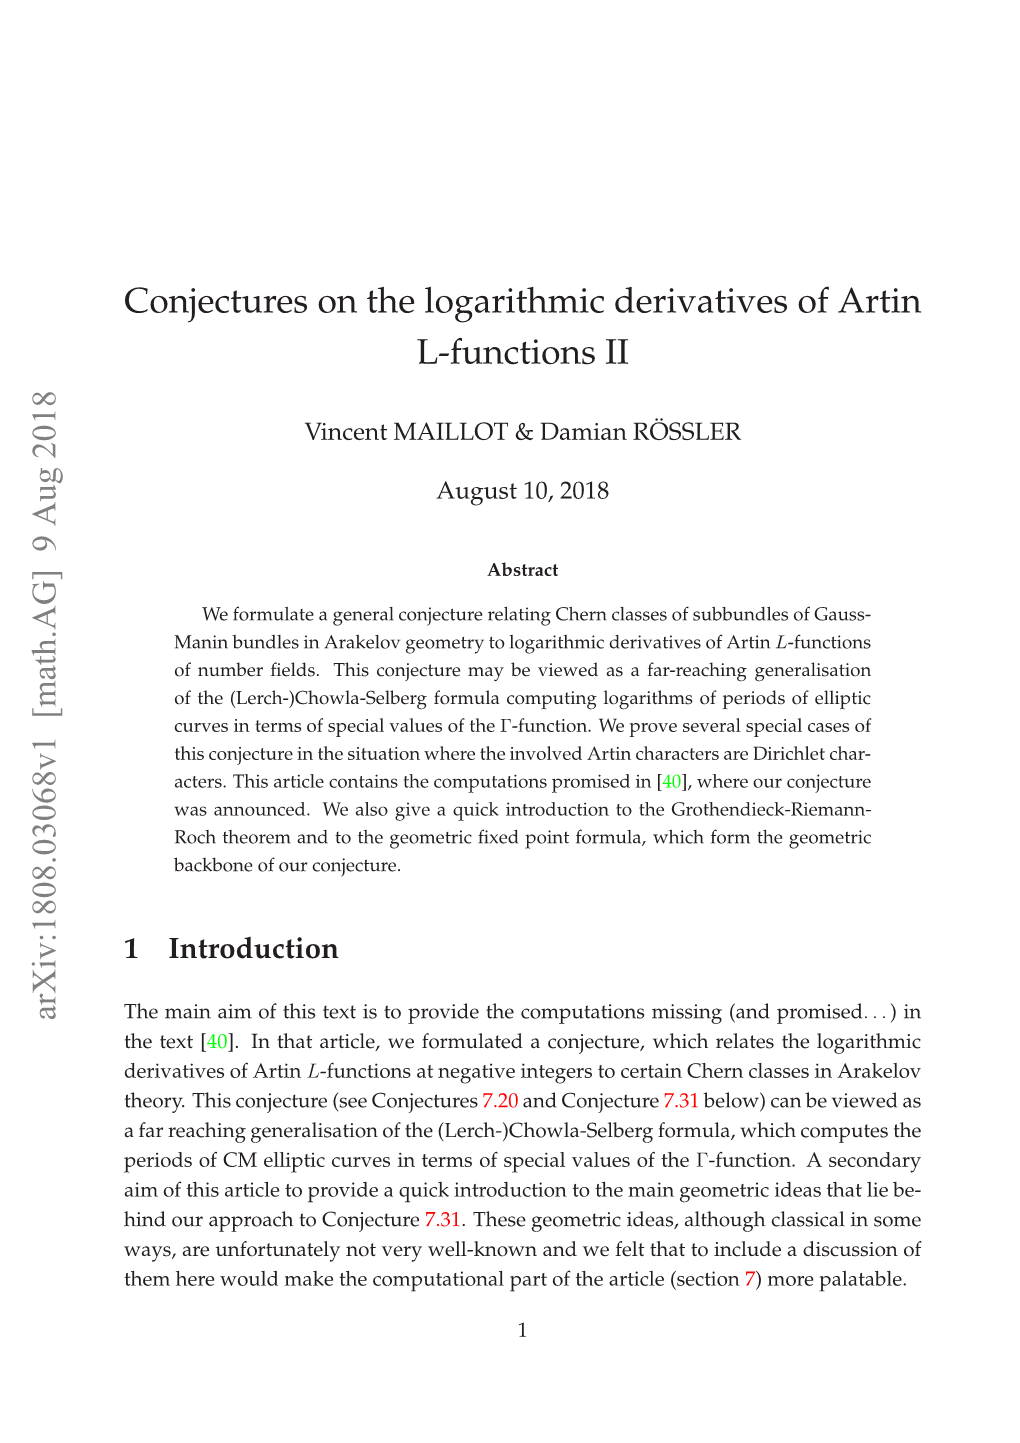 Conjectures on the Logarithmic Derivatives of Artin L-Functions II